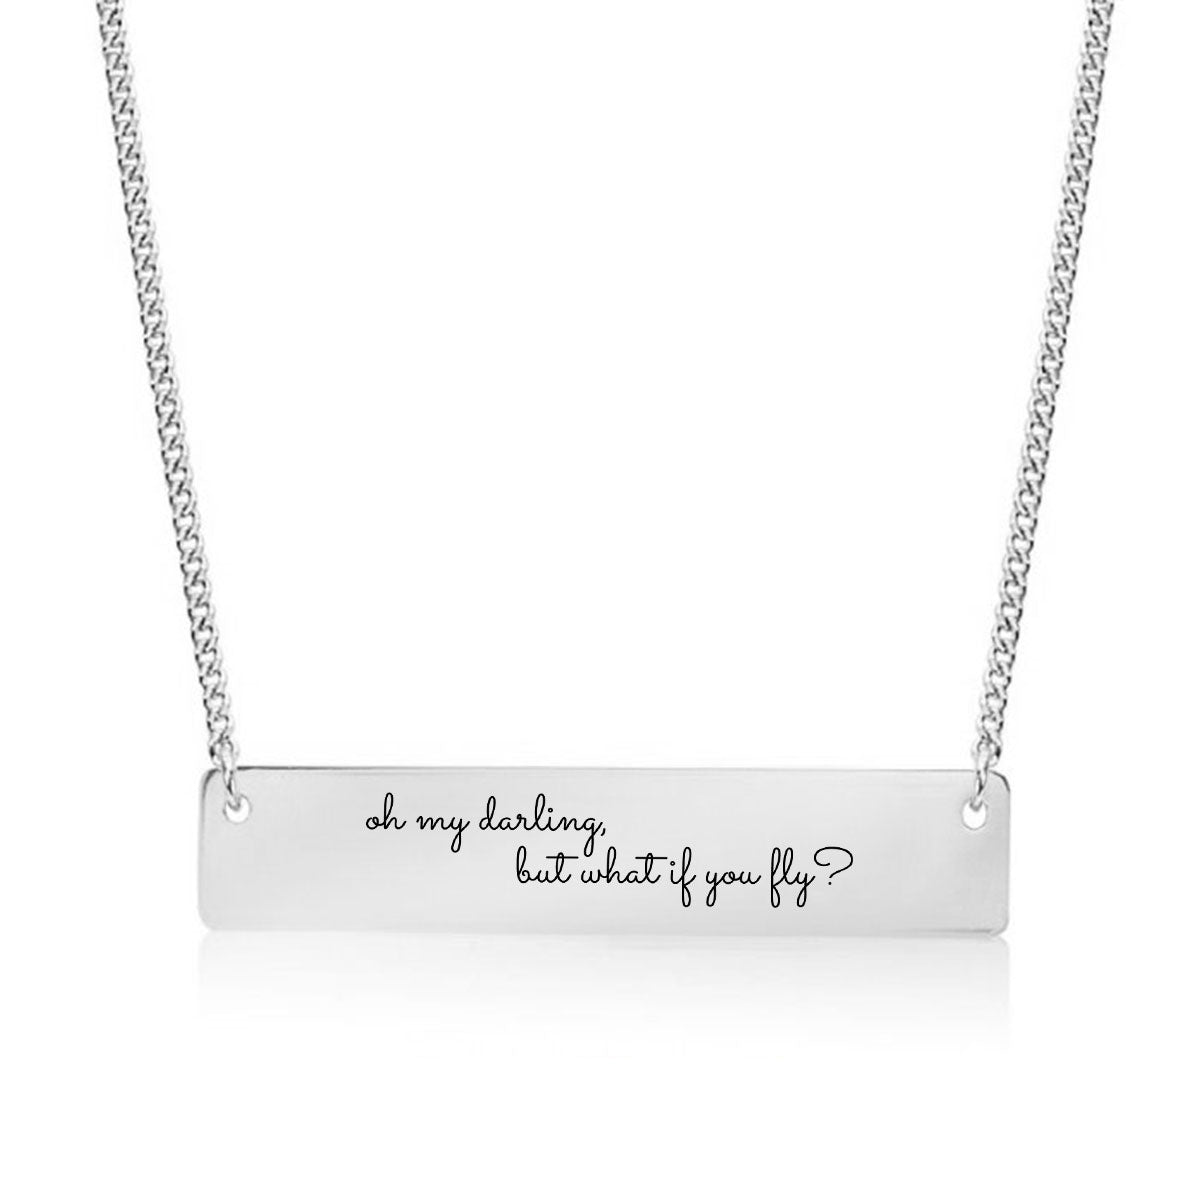 Silver Oh my darling, but what if you fly? Bar Necklace